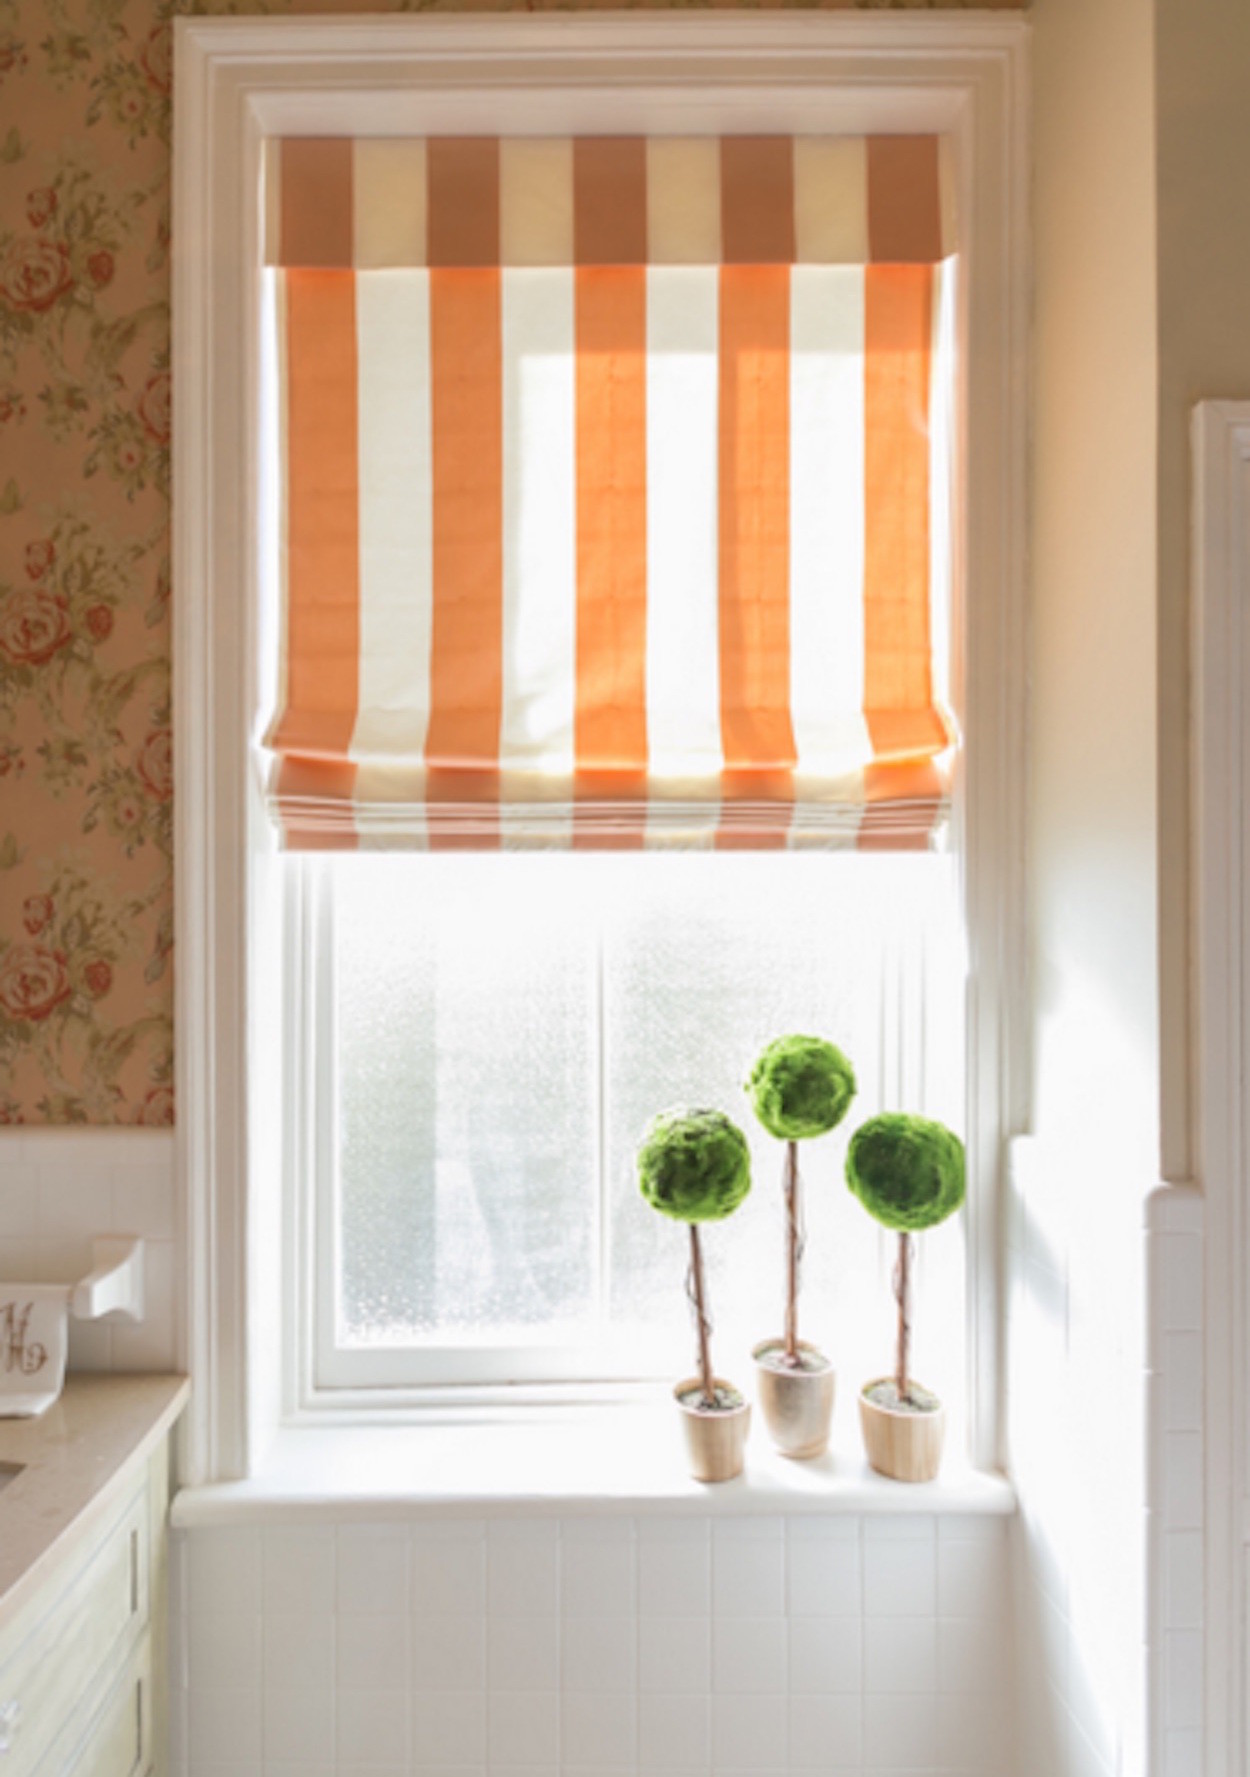 7 Different Bathroom Window Treatments You Might Not Have Thought Of